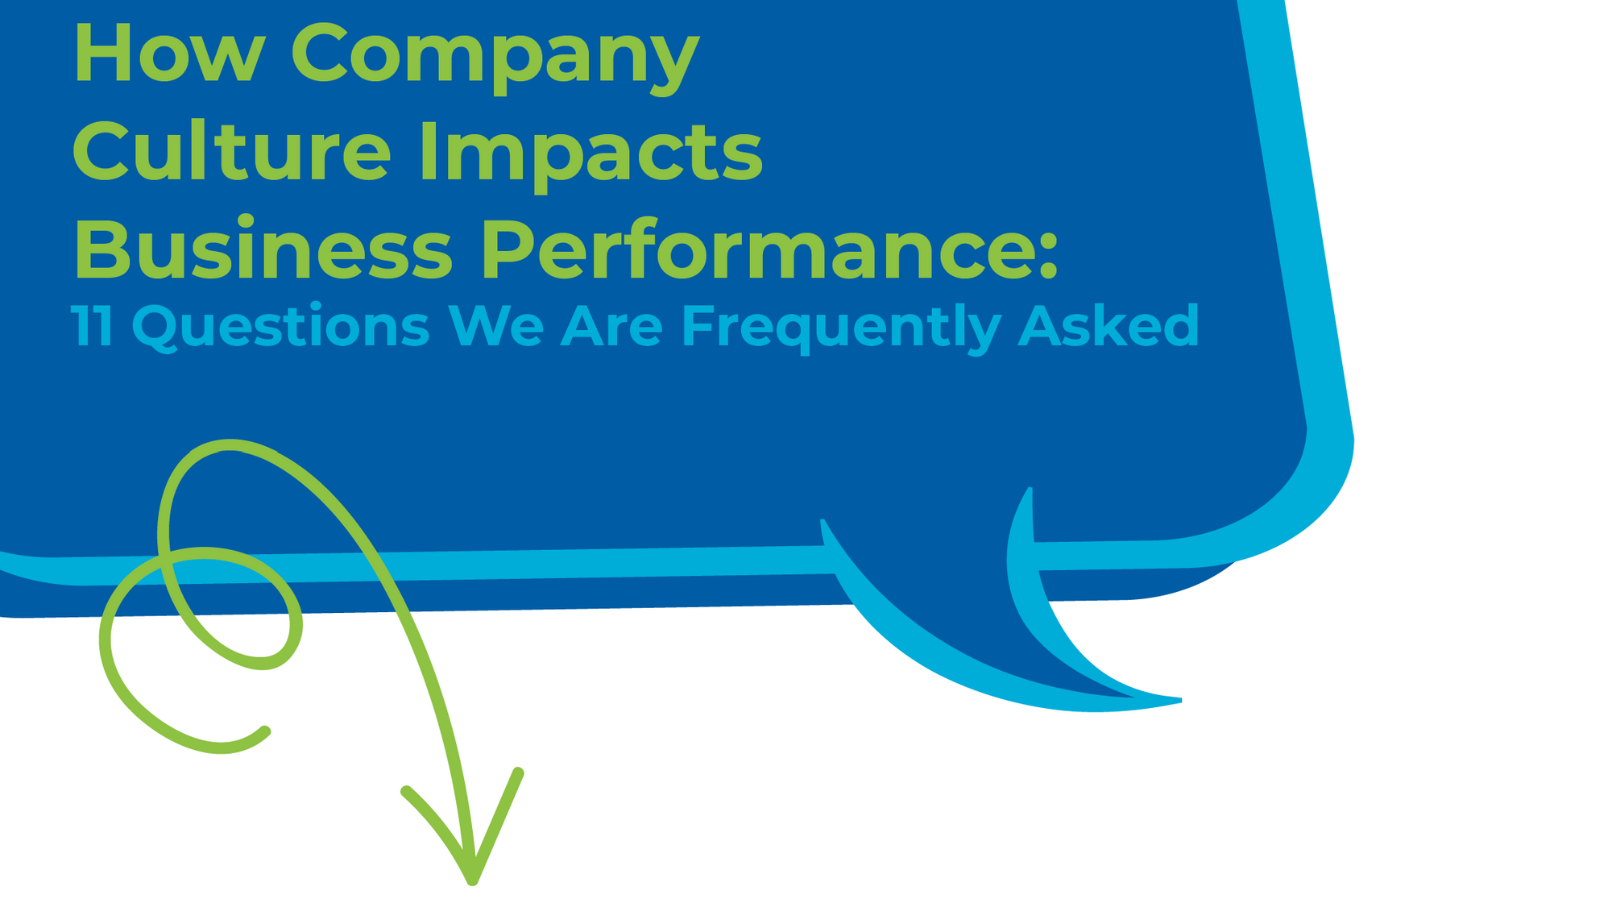  How Company Culture Impacts Business Performance